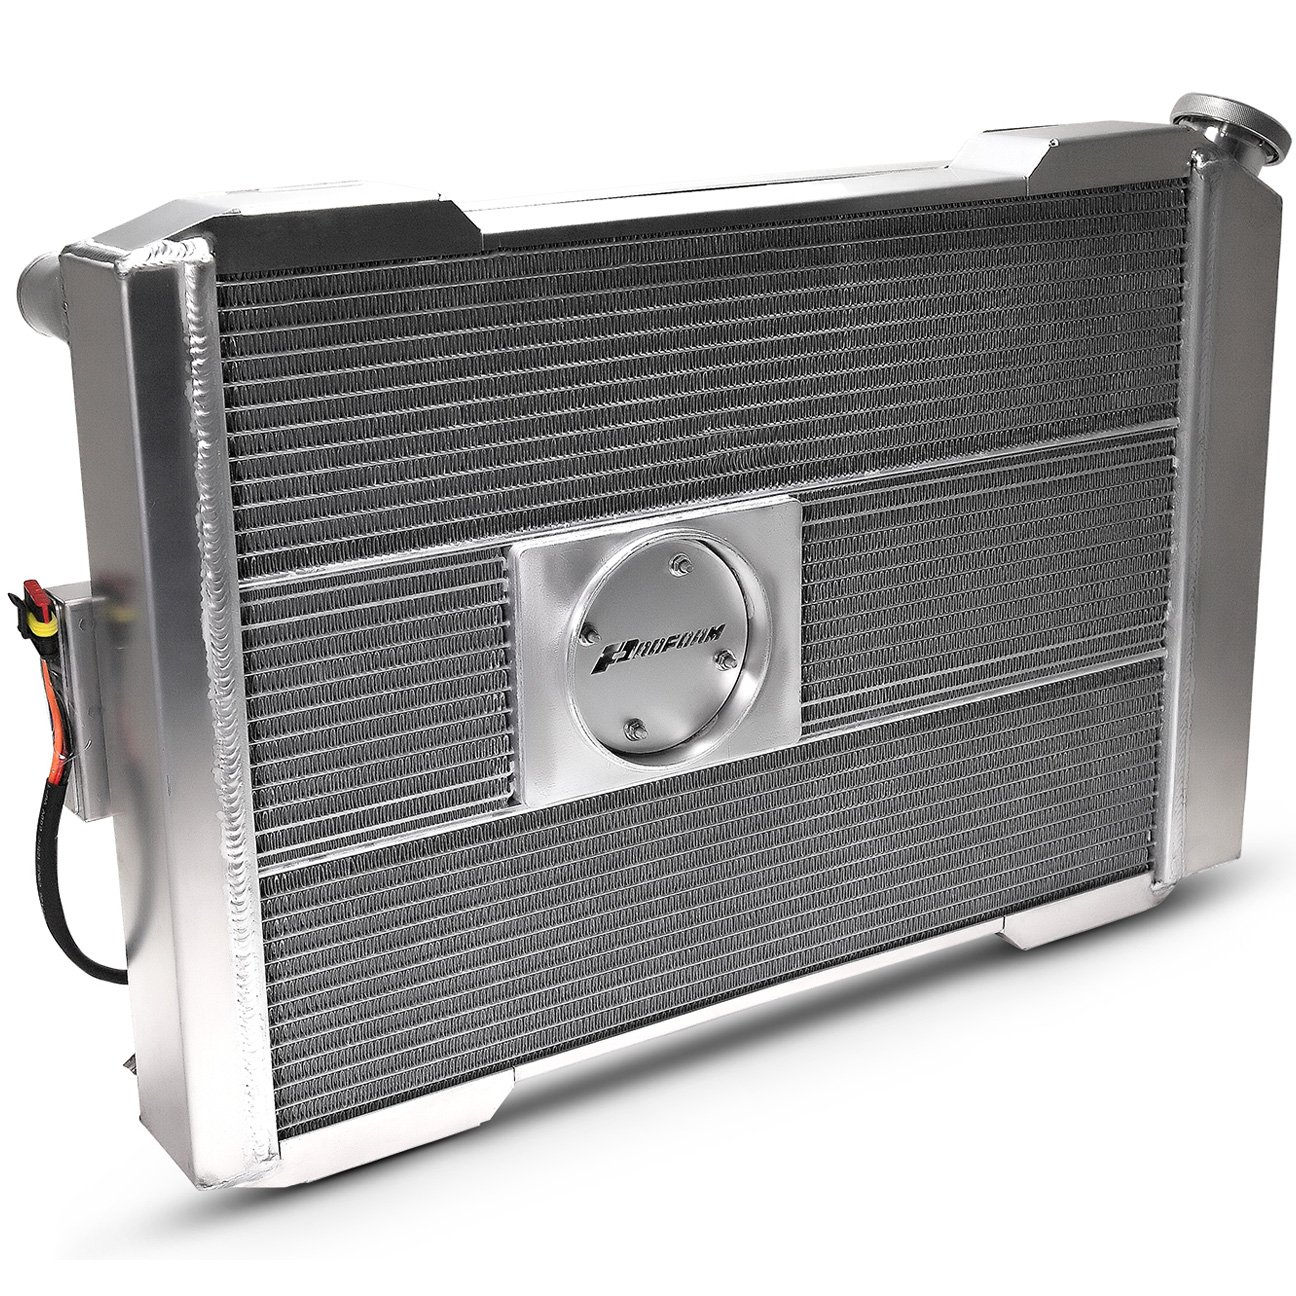 69680.1 Slim-Fit Radiator System for Select Ford Mustang,